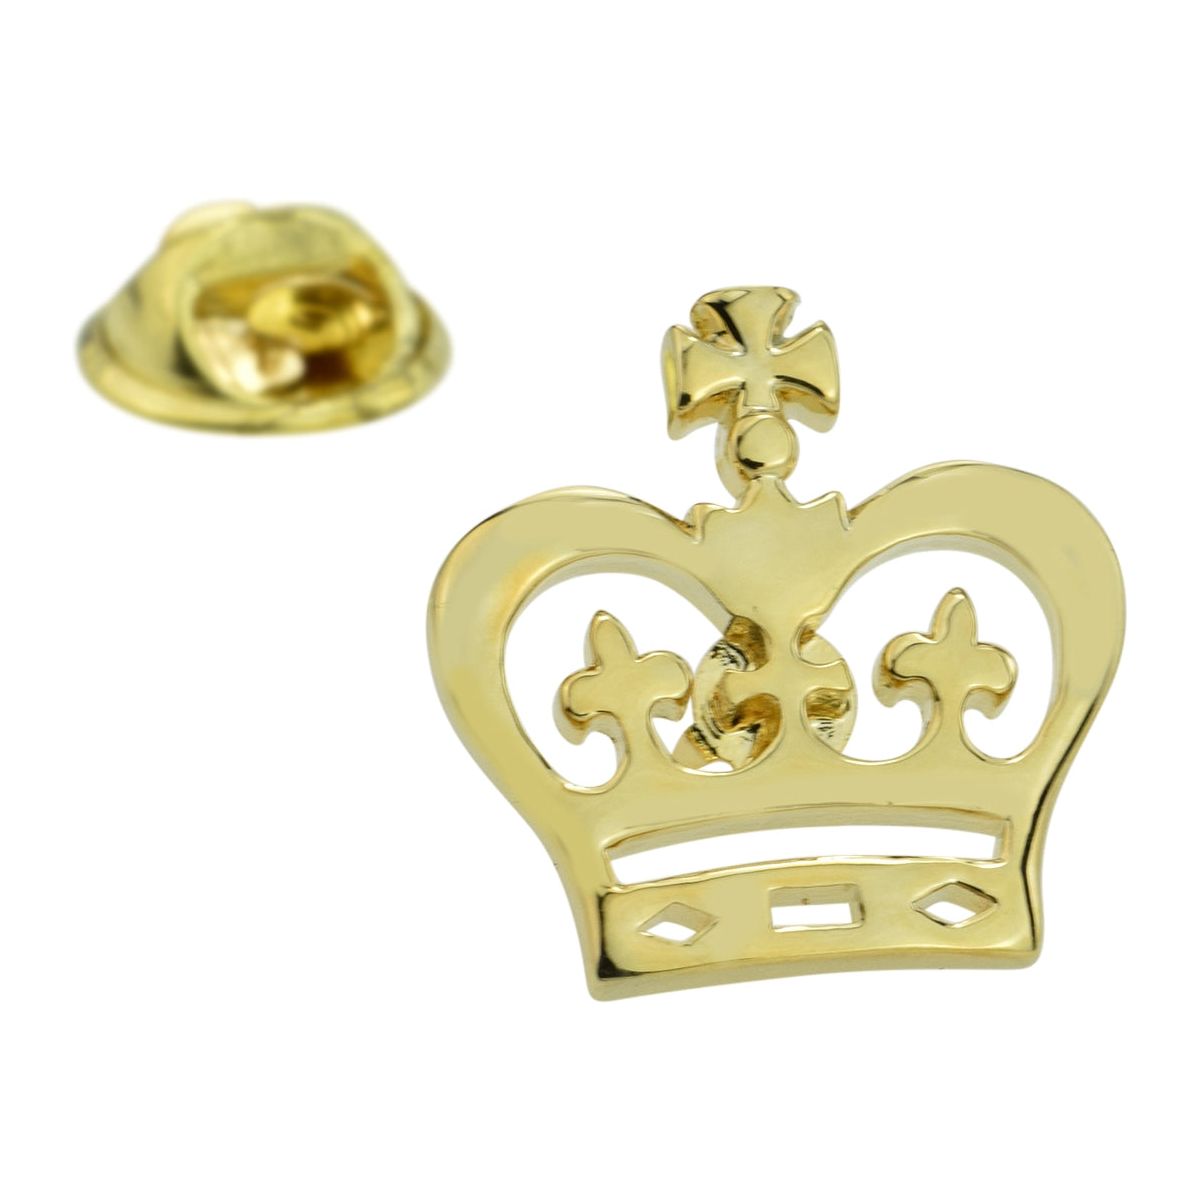 Gold Plated Flat Crown Design Lapel Pin Badge - Ashton and Finch